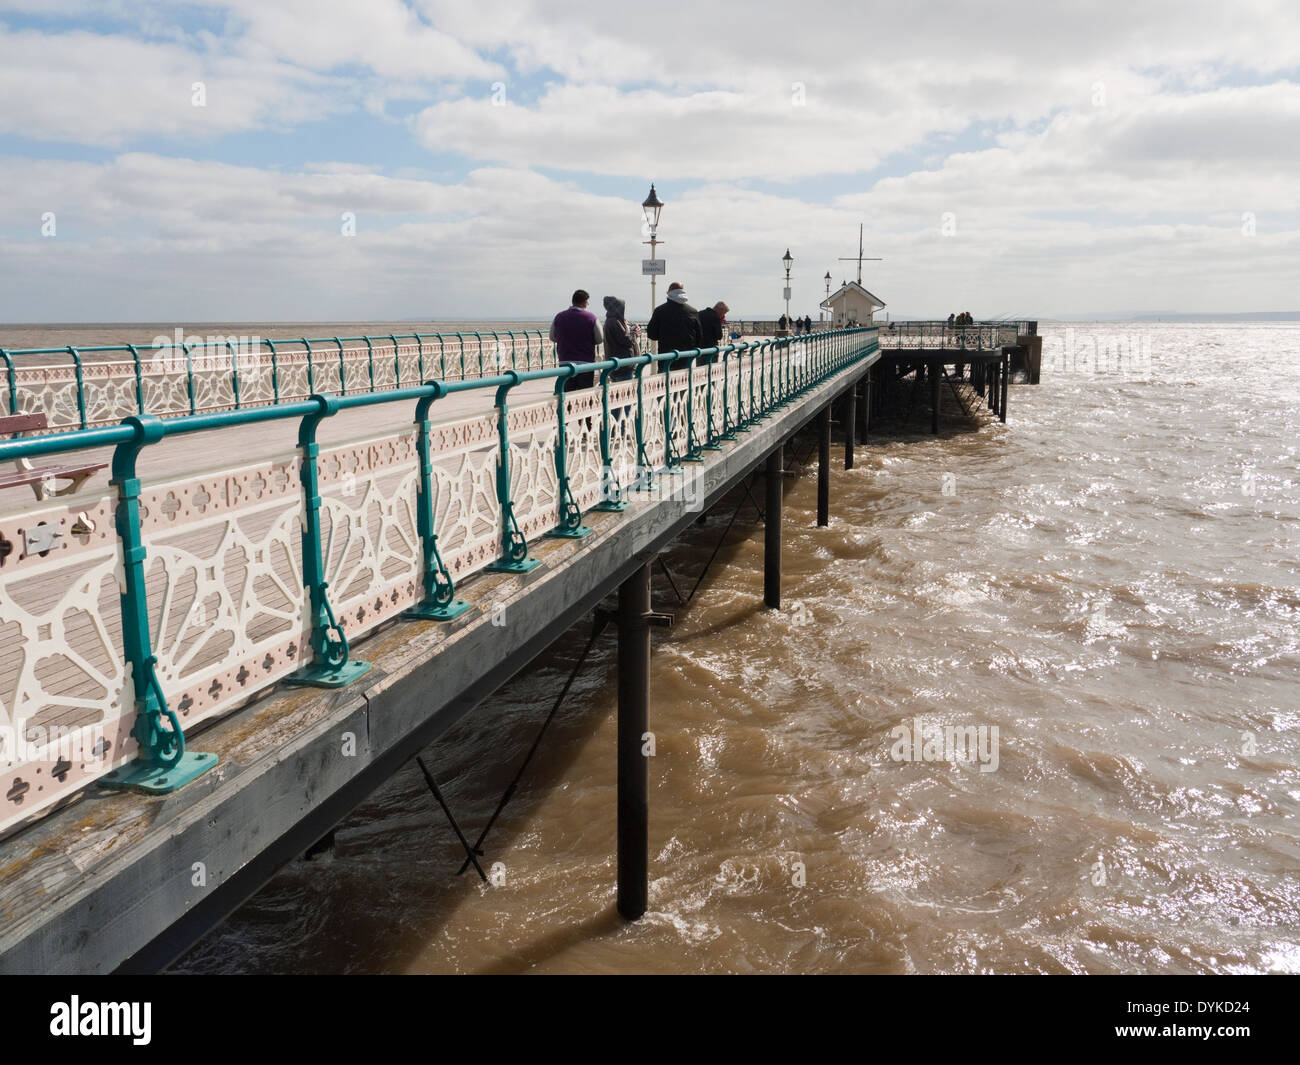 Penarth Pier and the waters of the Bristol Channel / Severn estuary - near Cardiff, South Wales Stock Photo